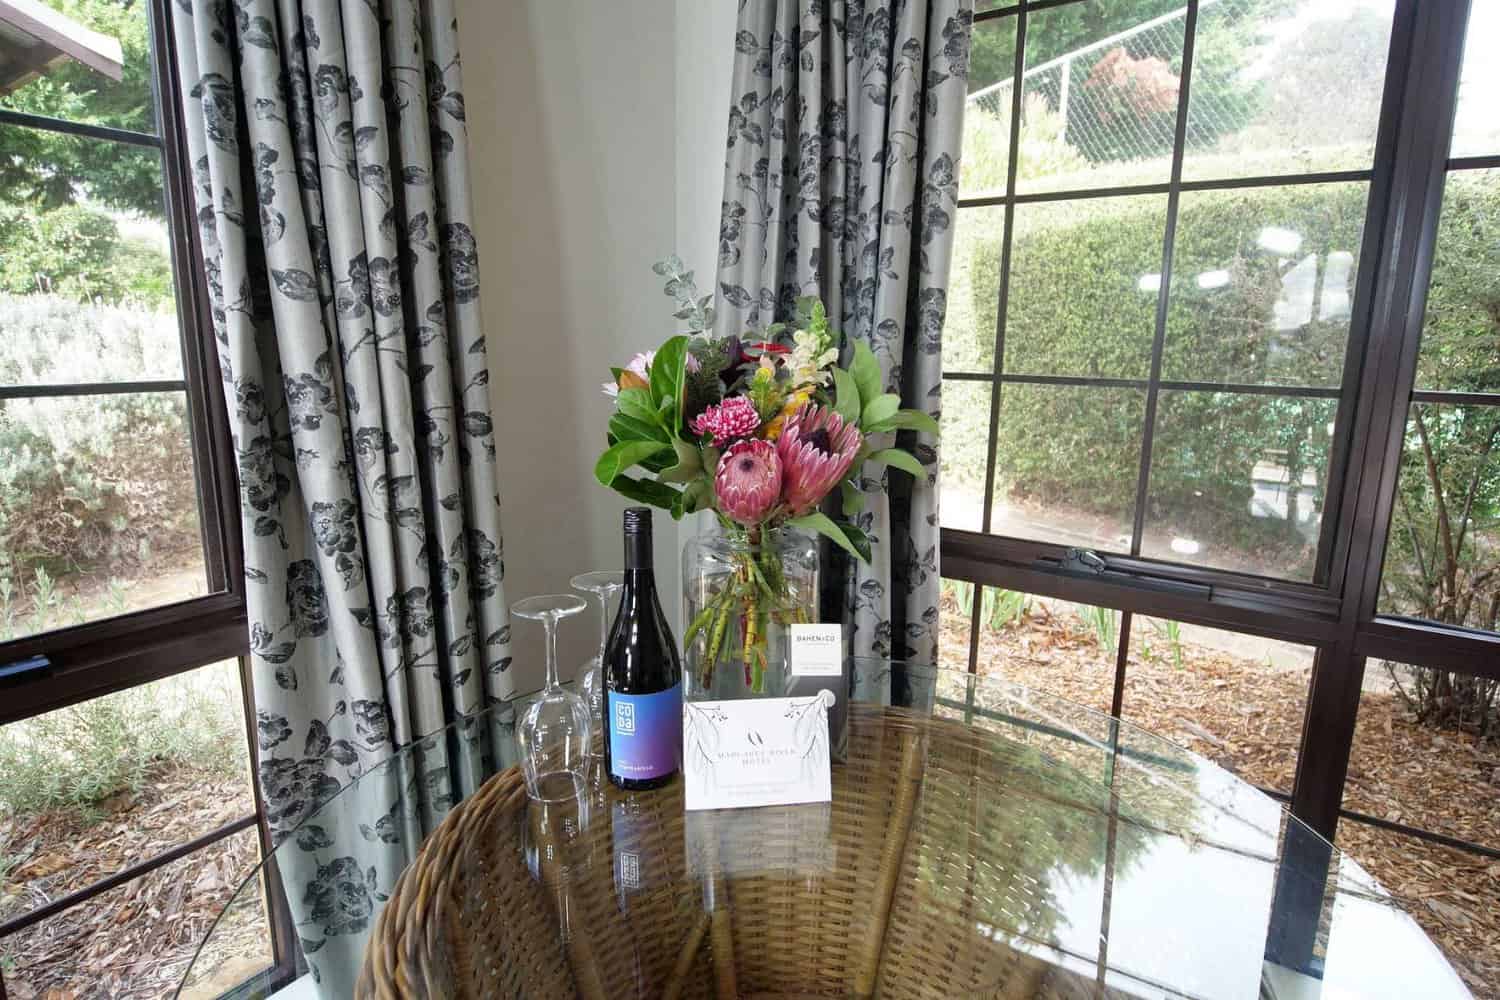 An inviting hotel room setting with a bottle of red wine and two glasses on a round wicker table, featuring a lush bouquet of native flowers and a Margaret River Motel leaflet, with garden views through the window.